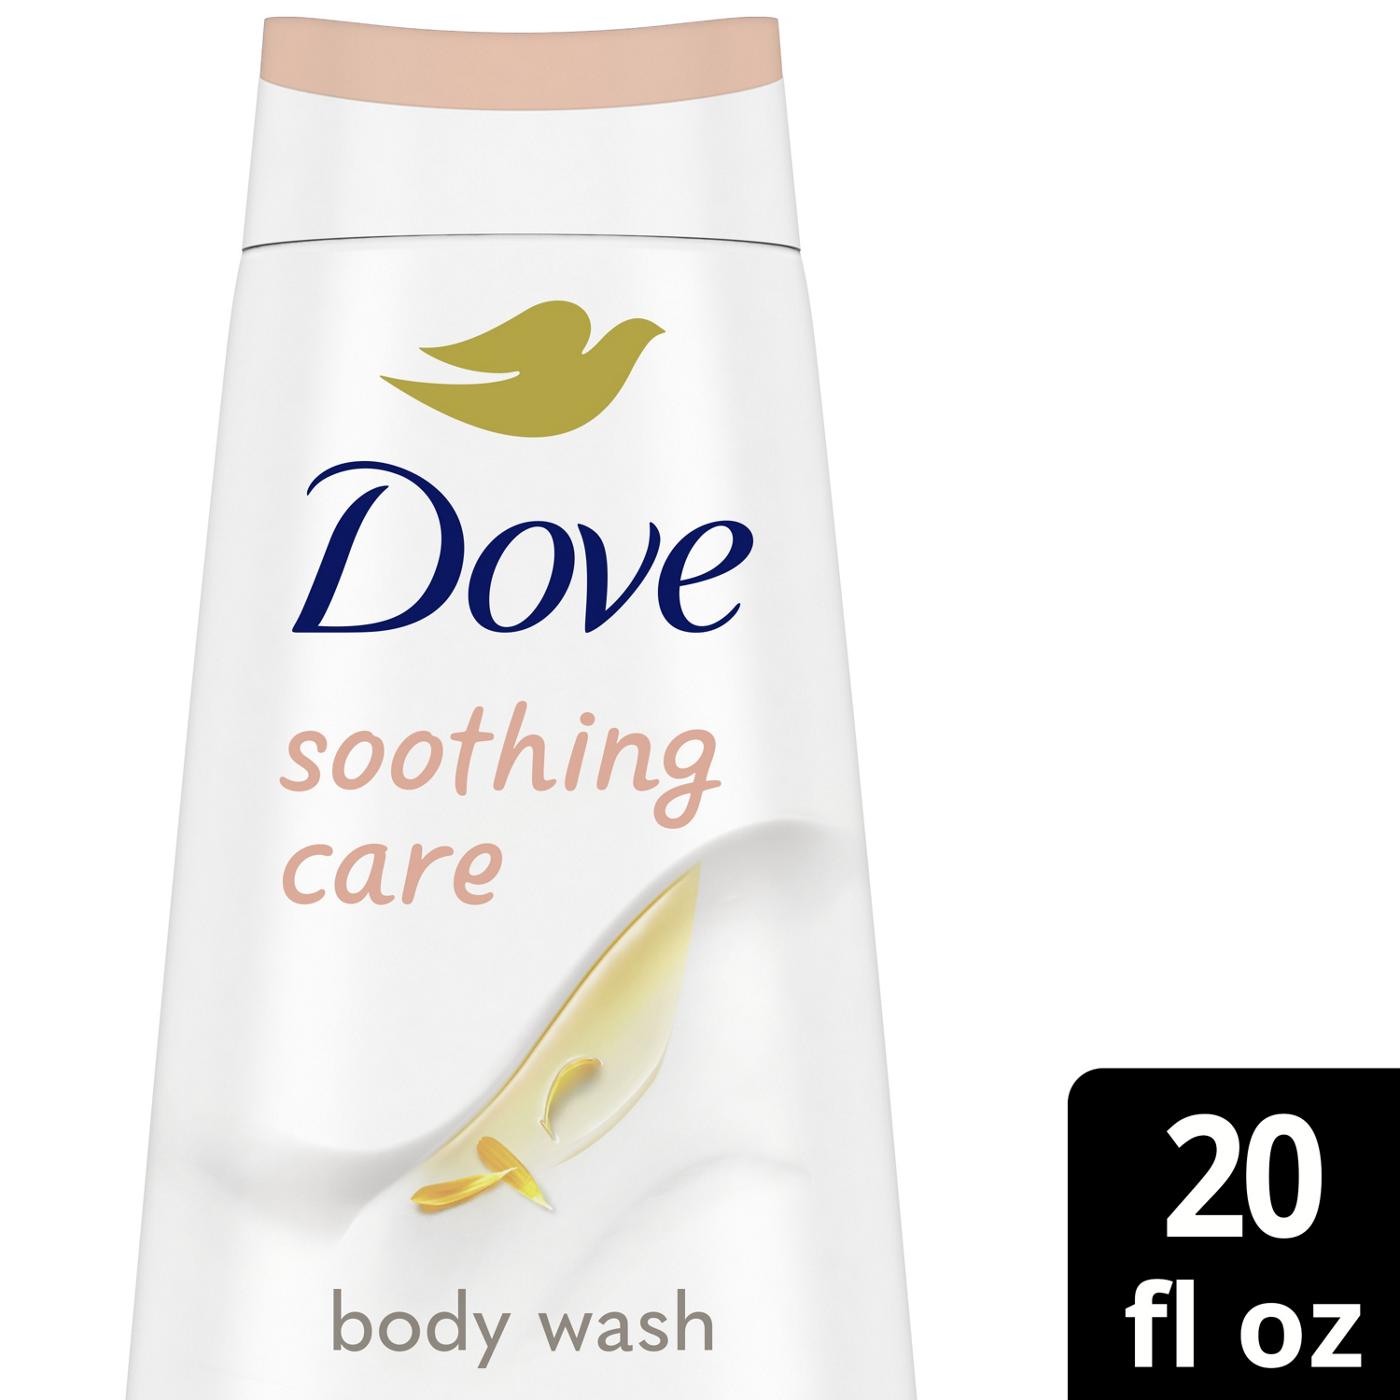 Dove Soothing Care Body Wash - Calendula Oil; image 7 of 8